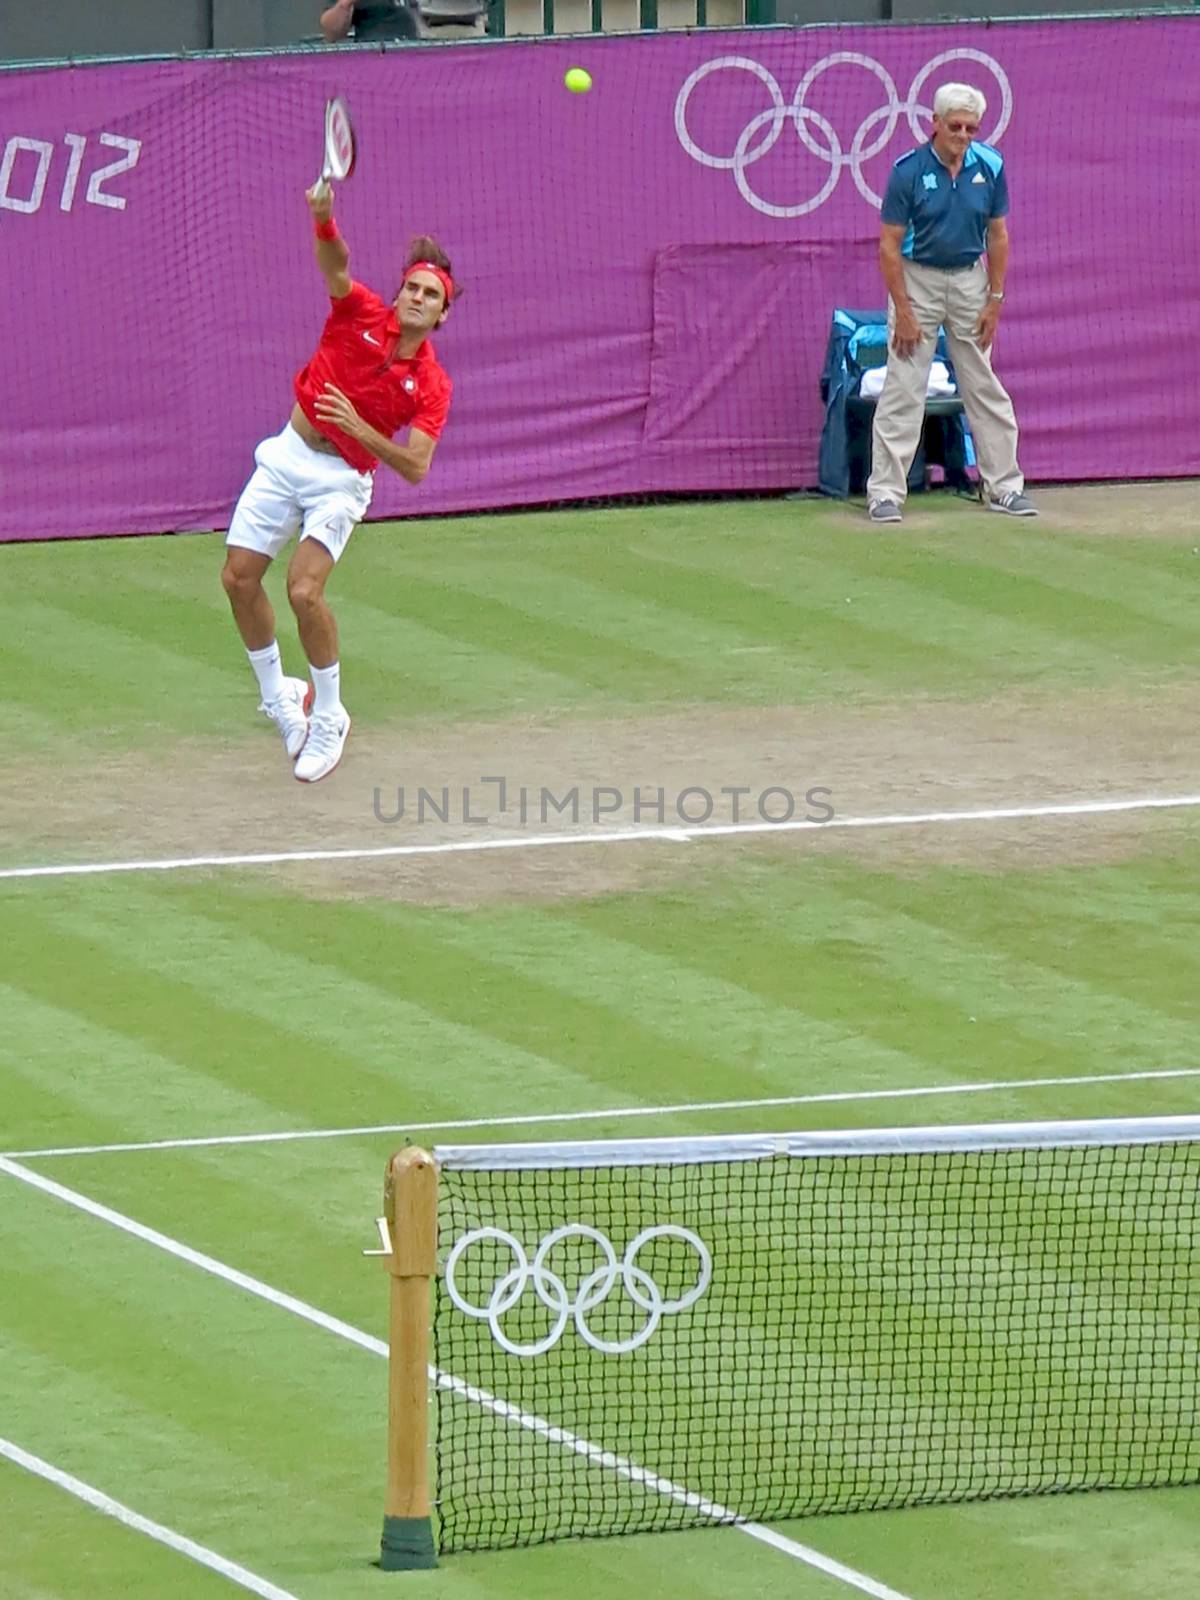 WIMBLEDON, ENGLAND - August 2nd, 2012 - Roger Federer during one of his singles matches at the summer Olympics in London in 2012. He came 2nd and won the silver medal in the tournament.